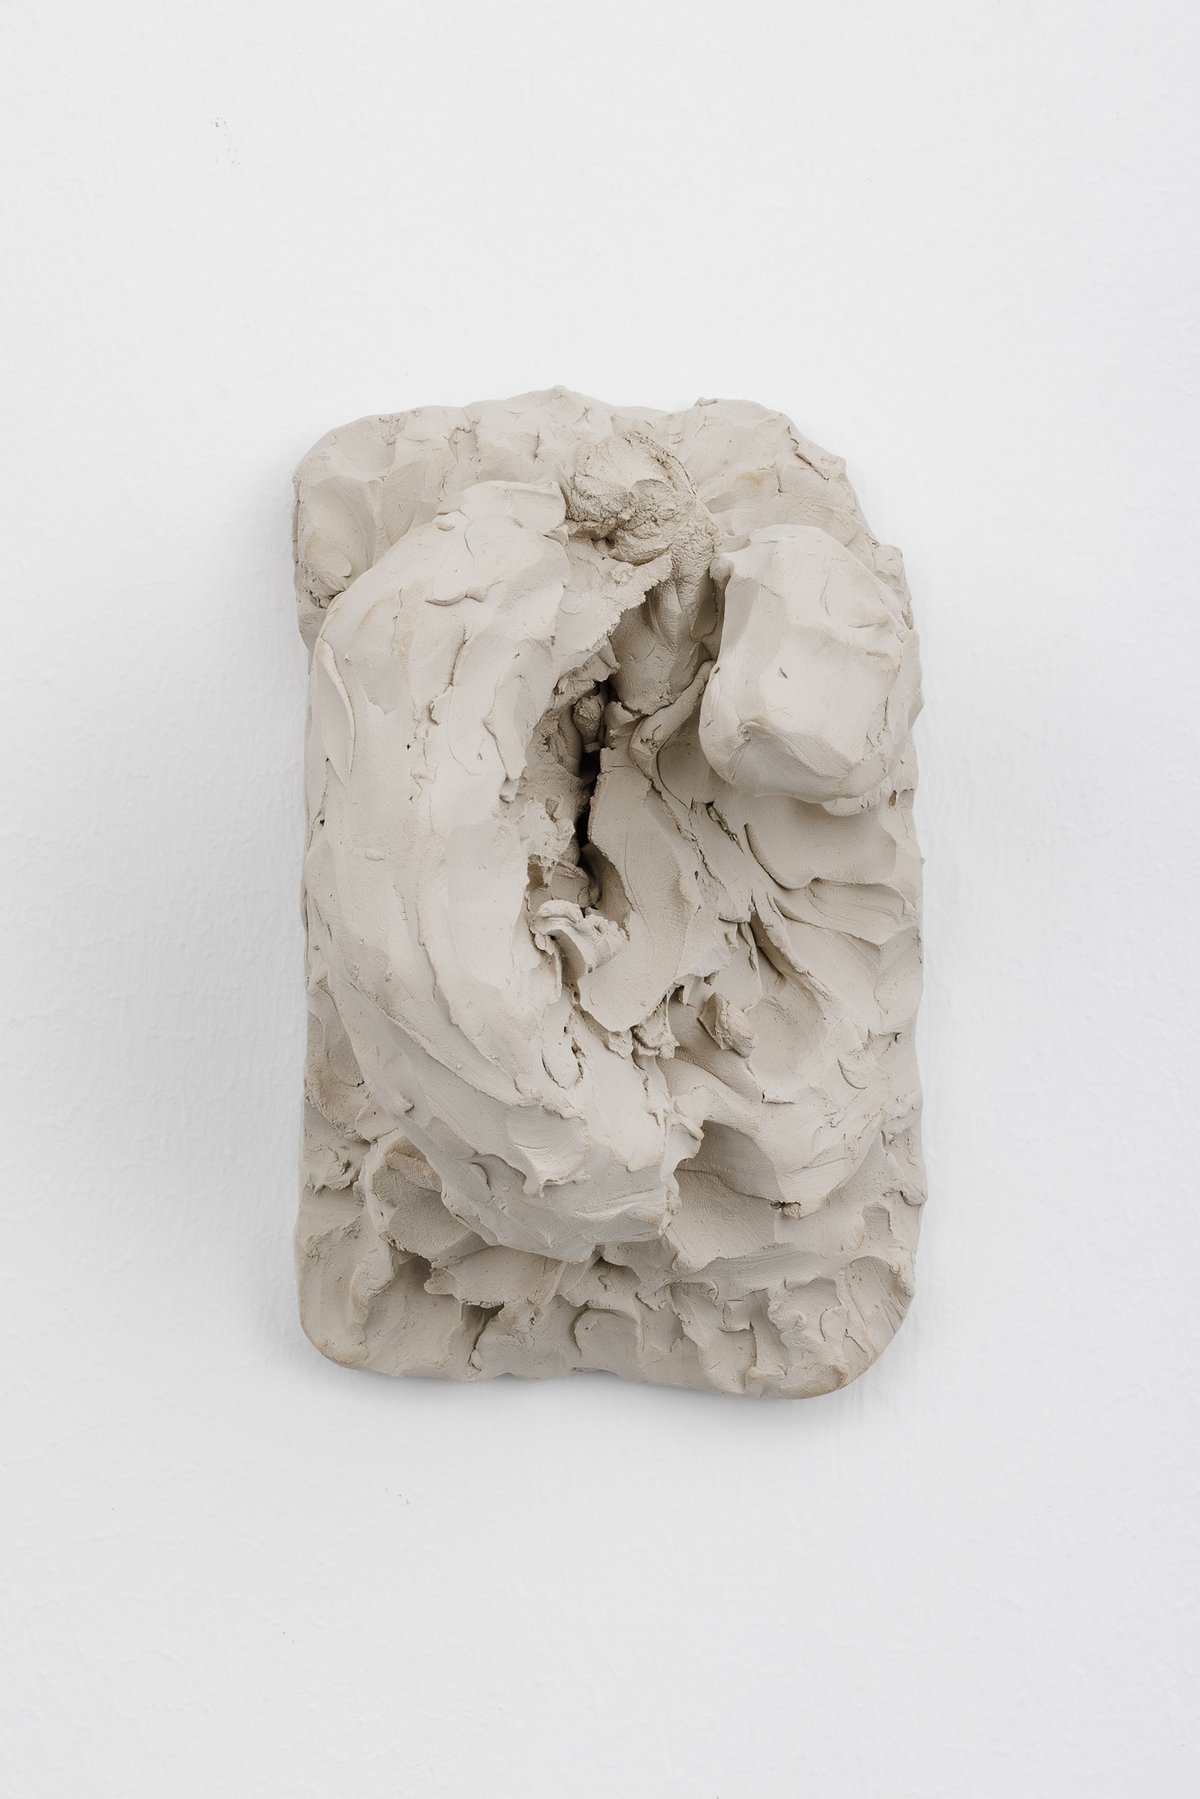 Jutta ZimmermannUntitled, 2017Clay21 x 13 x 12 cmCourtesy of the artist and Galerie Lars Friedrich